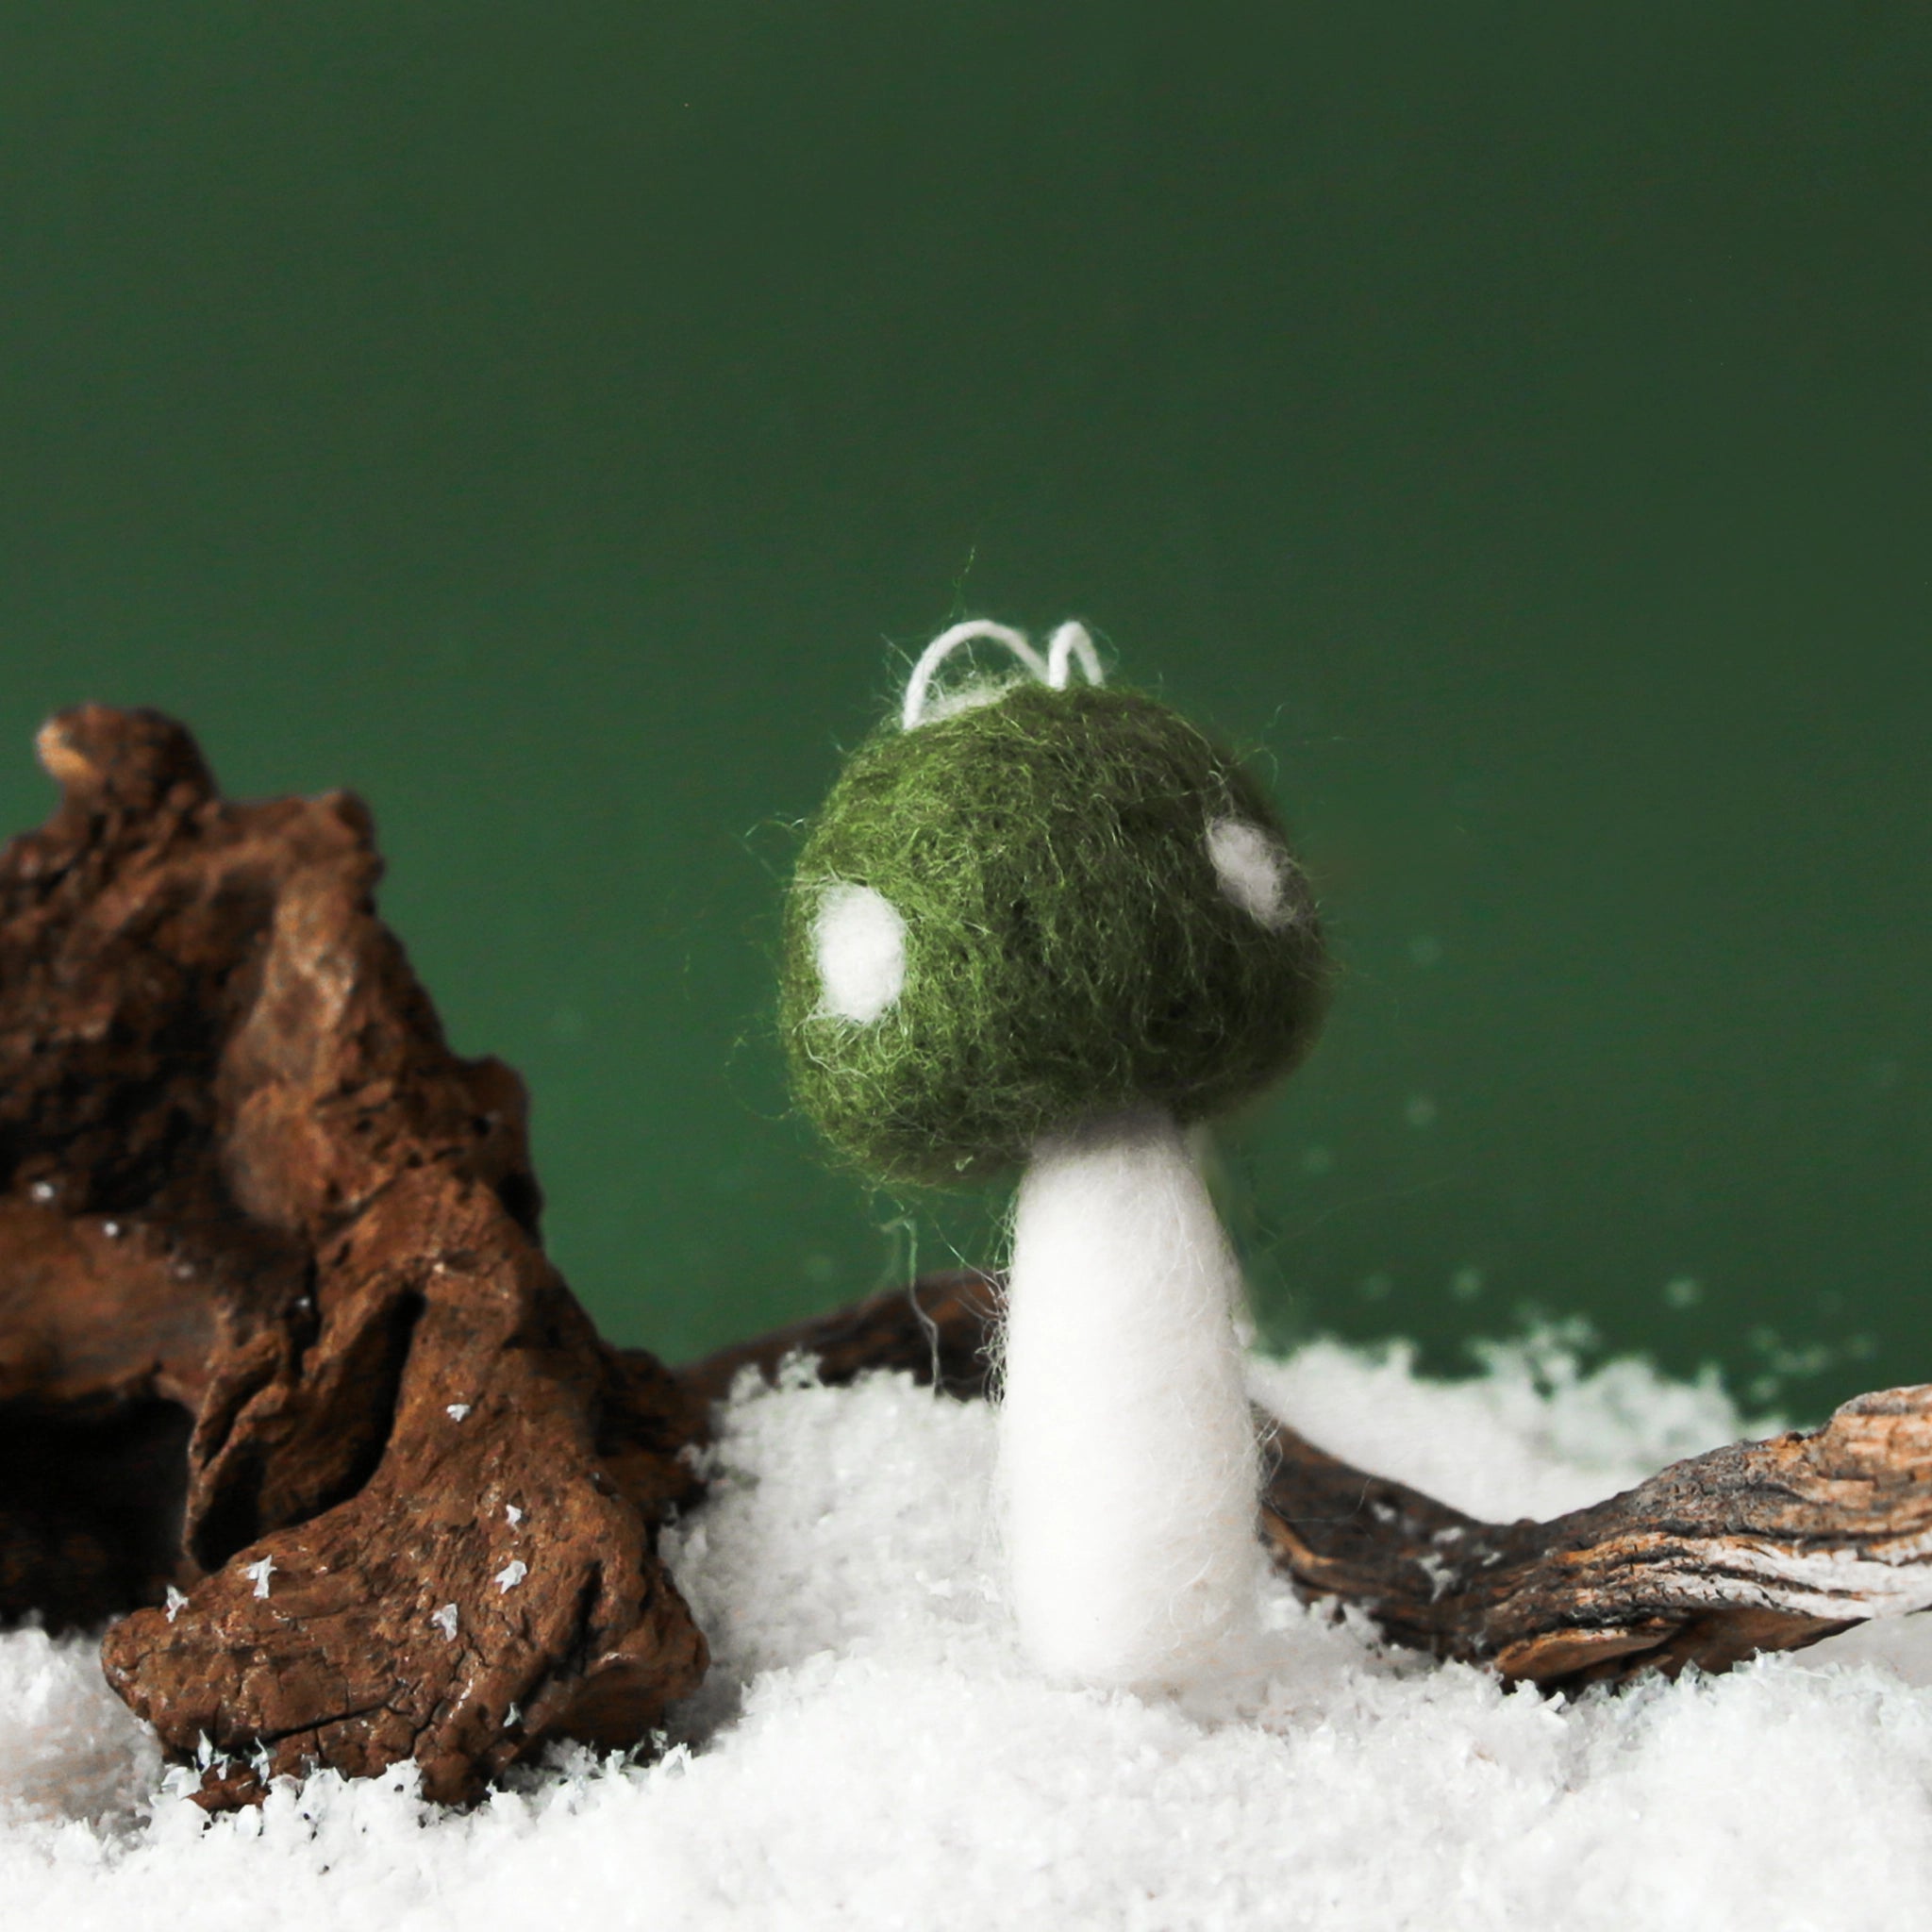 On a green snowy background is a green felt mushroom ornament with ivory spots and details